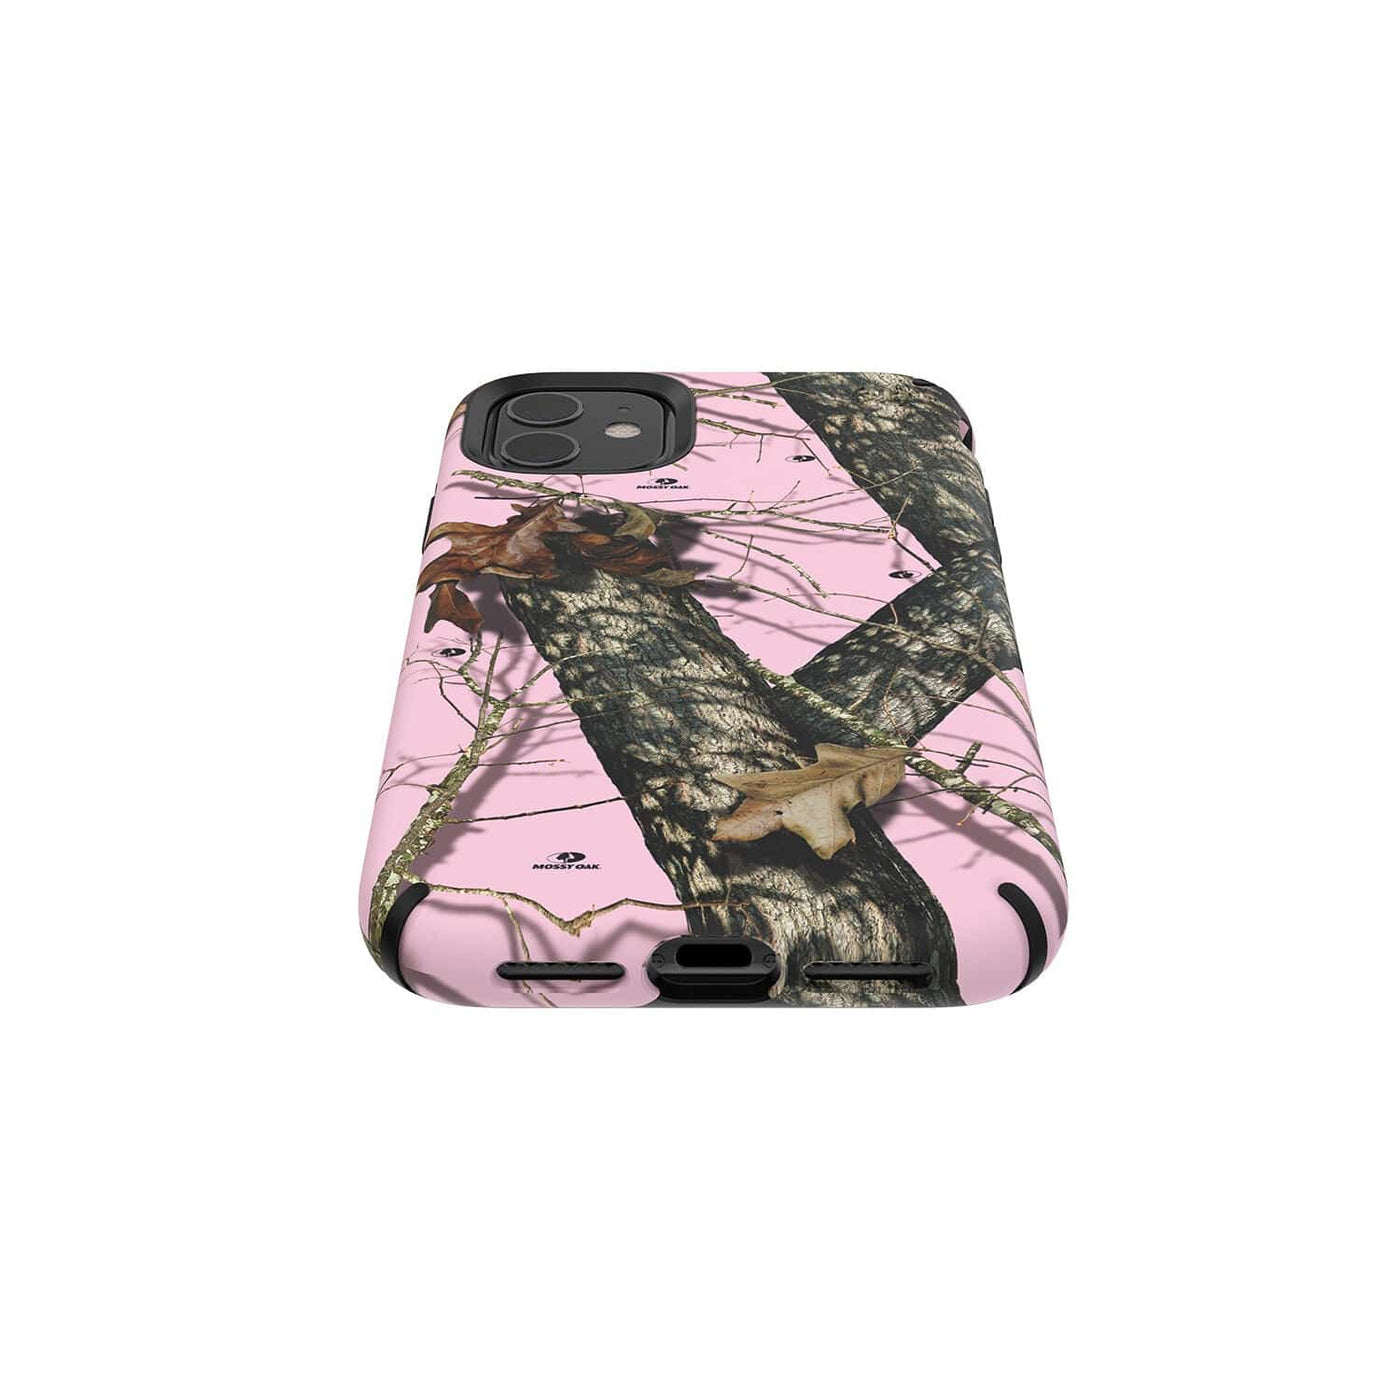 Speck Presidio Inked Mossy Oak Edition iPhone 11 Cases Break-Up Pink